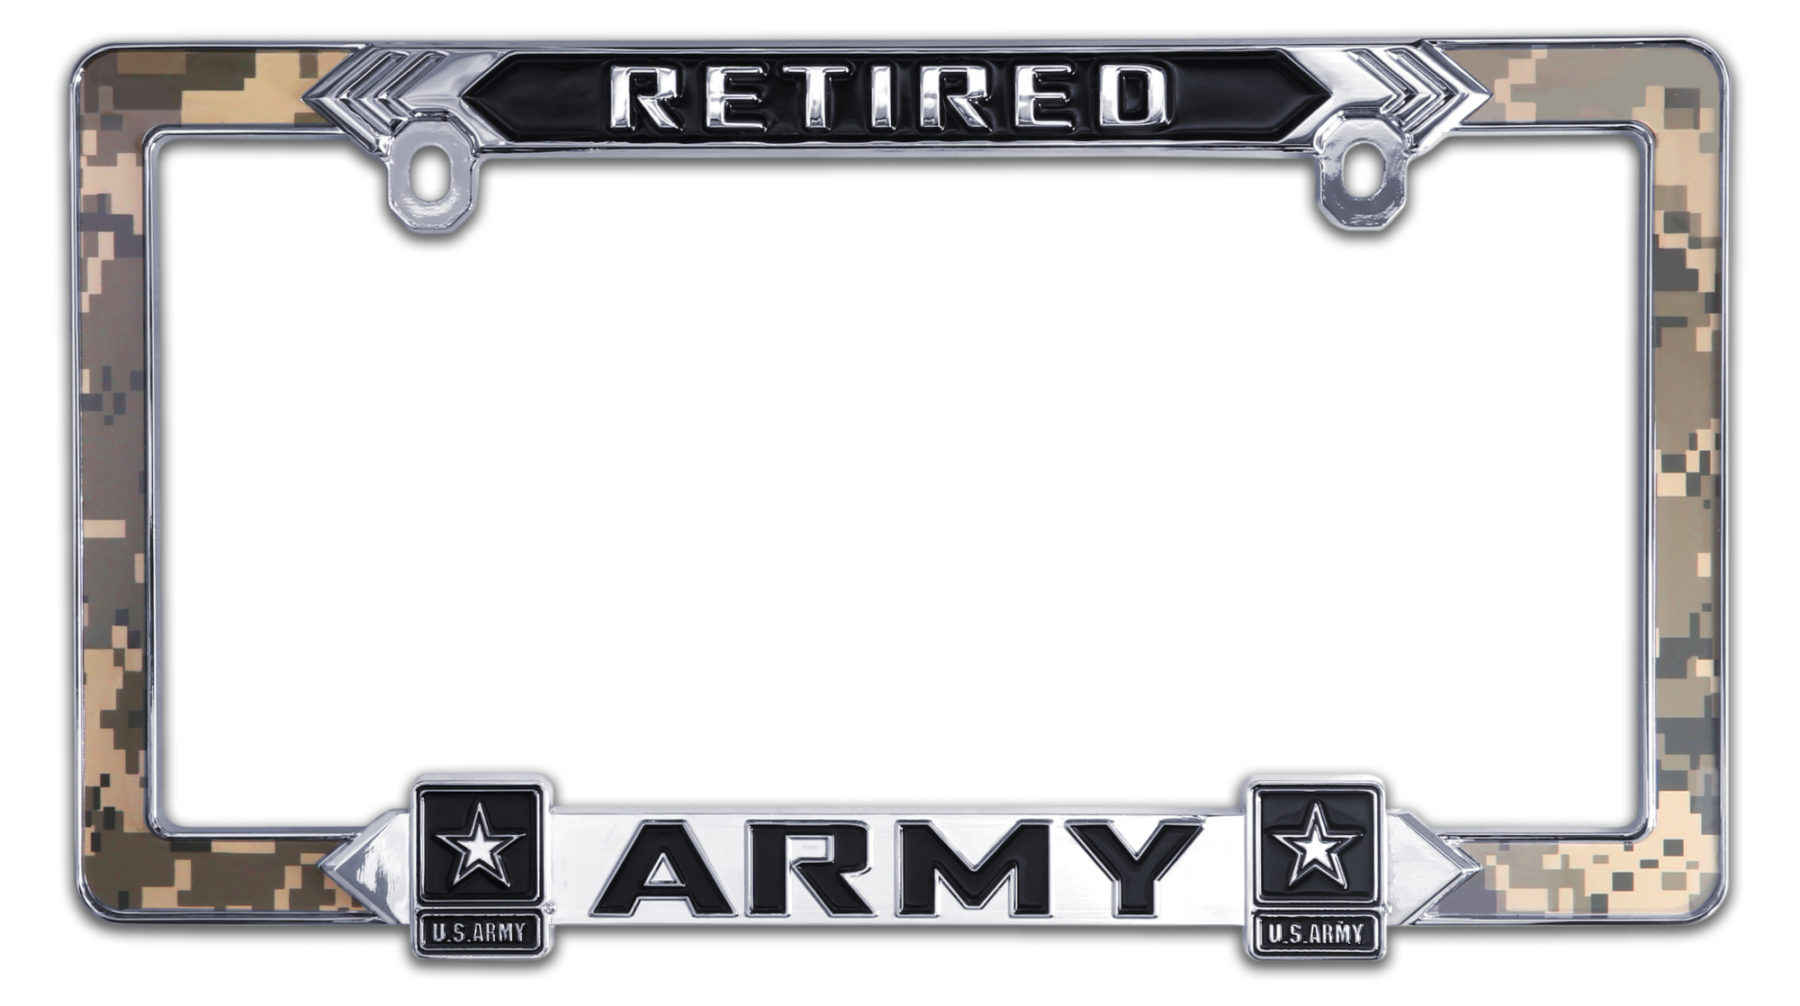 Made in the USA US Army Retired License Plate Tag Frame Metal Chrome